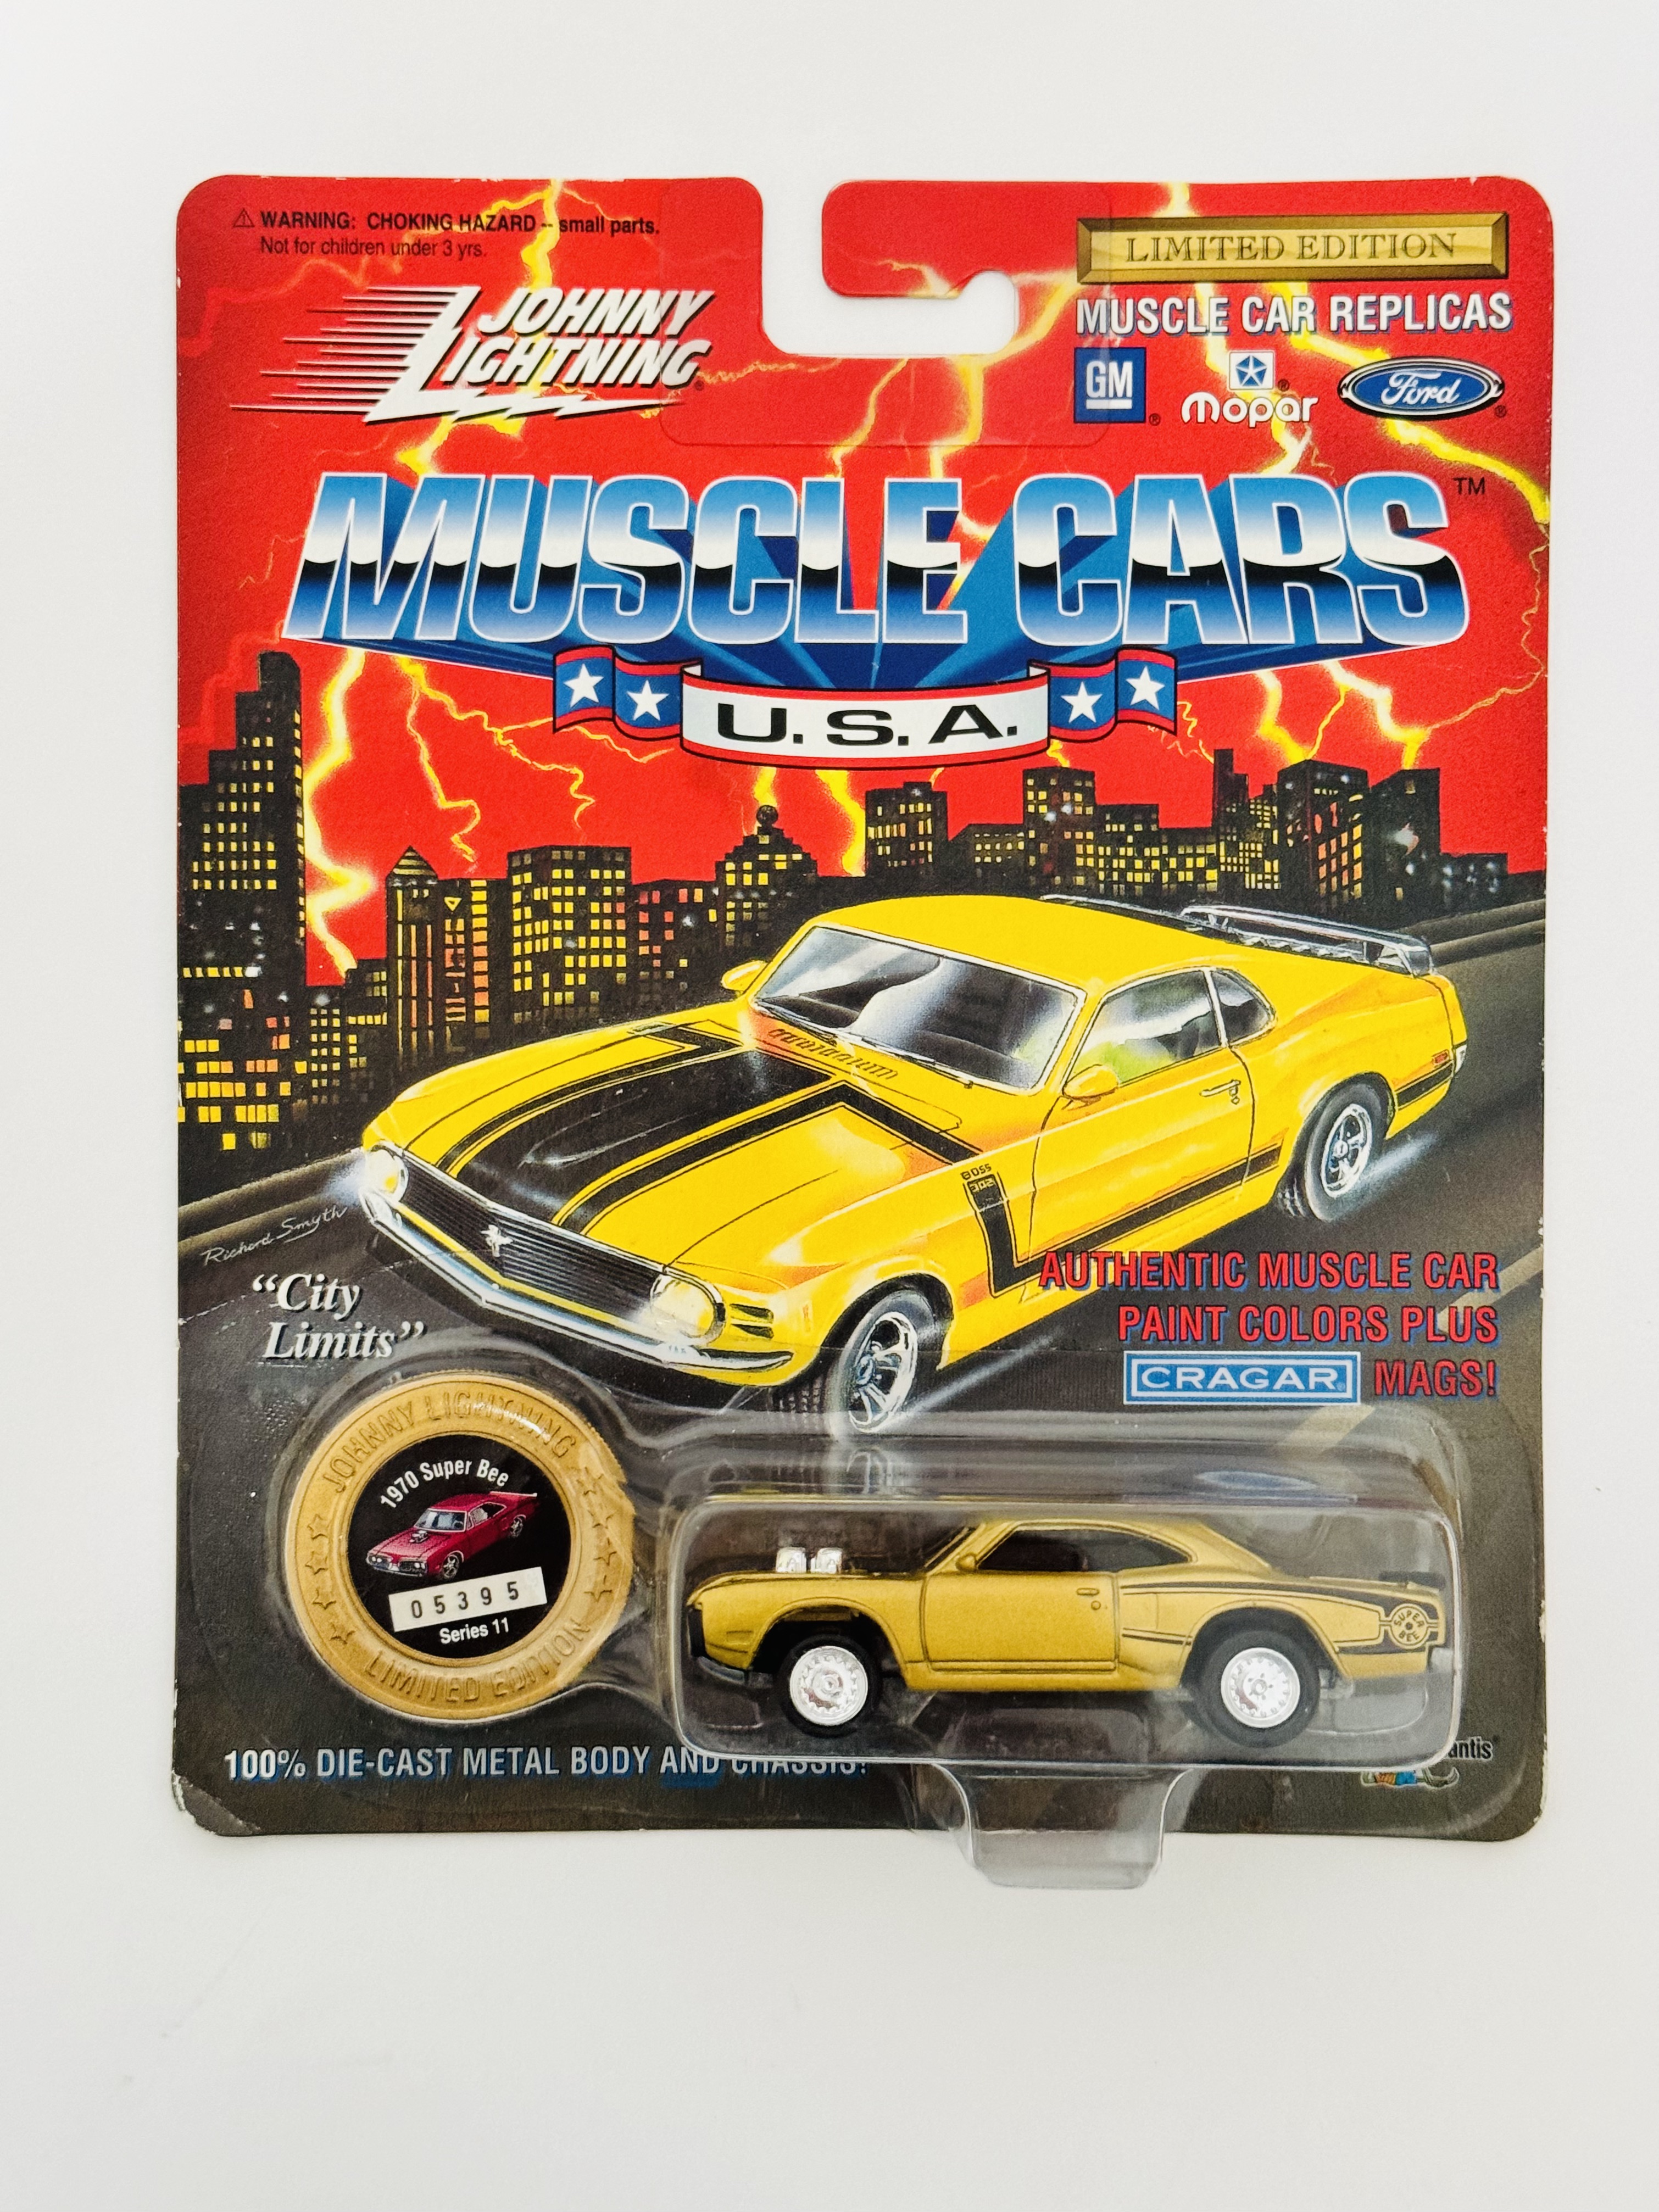 Johnny Lightning Muscle Cars U.S.A. 1970 Super Bee